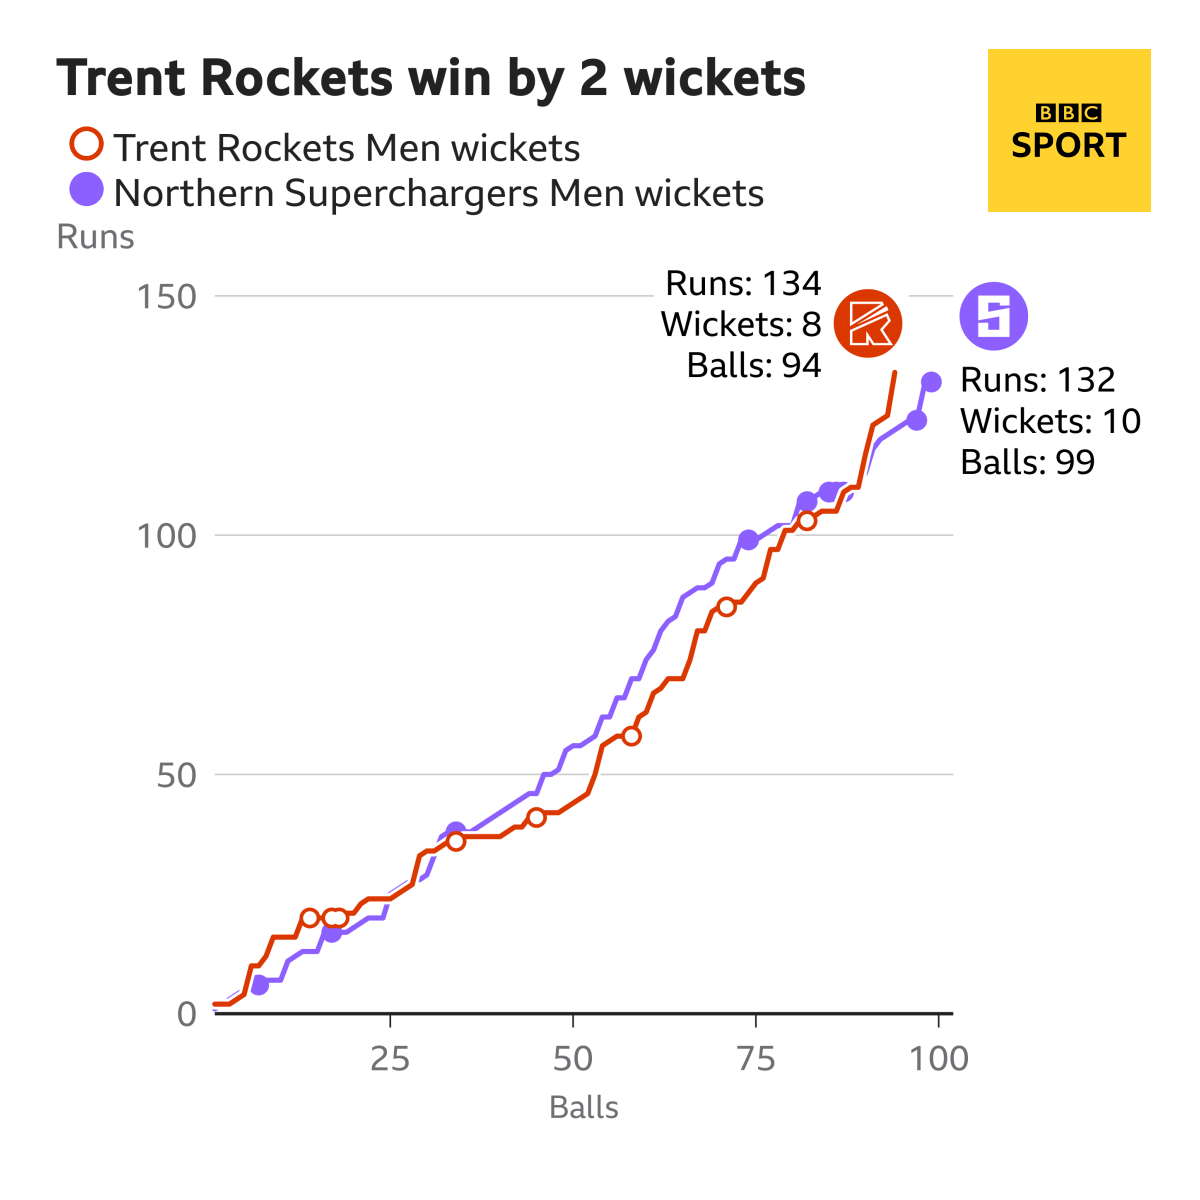 A worm graph scoring the rate of scoring by the Trent Rockets compared to the Northern Superchargers during their innings